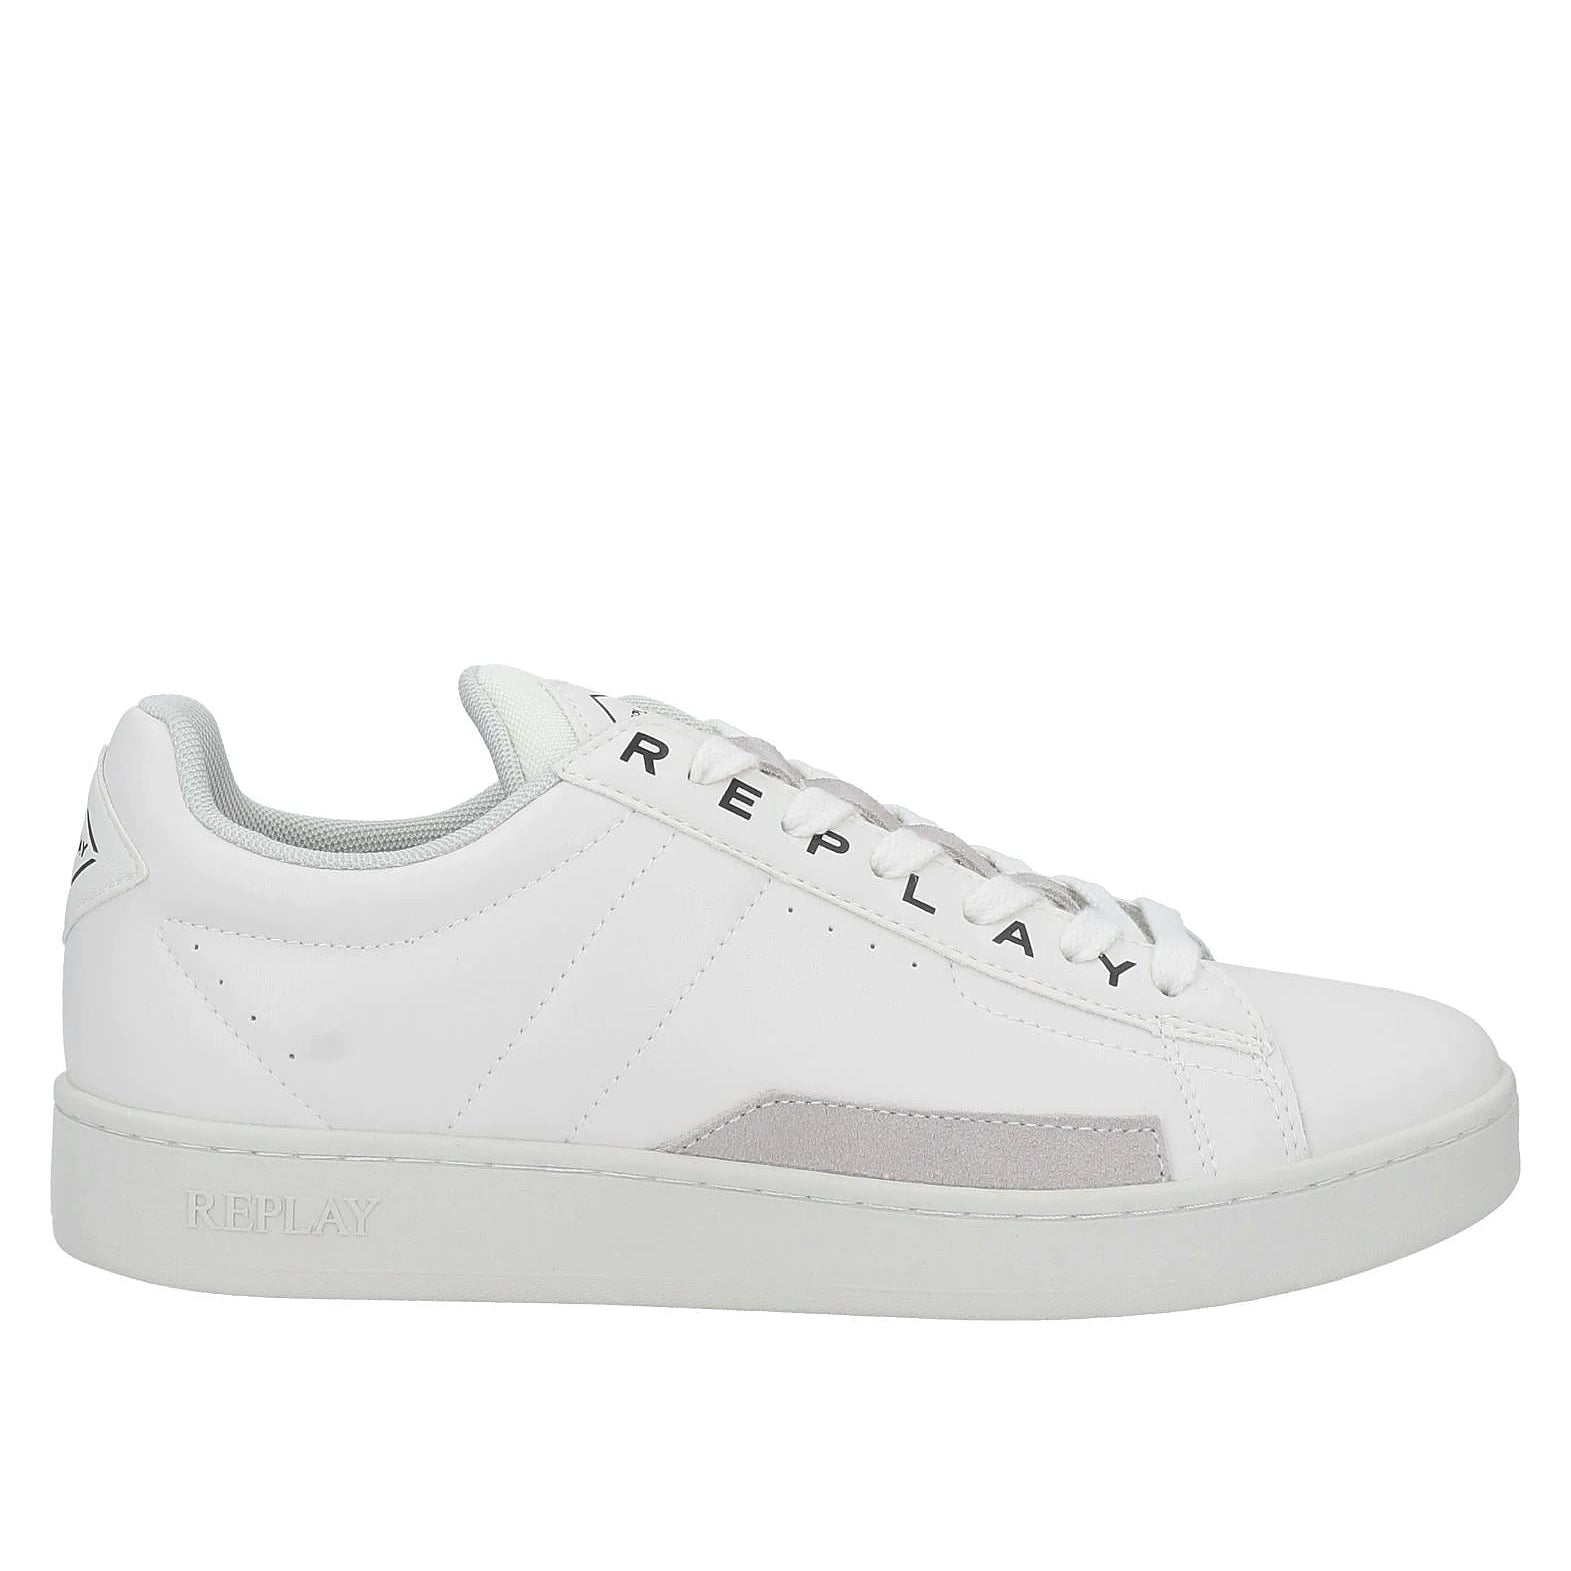 Replay Men's Drum Leather M Sneaker, 061 White, 10